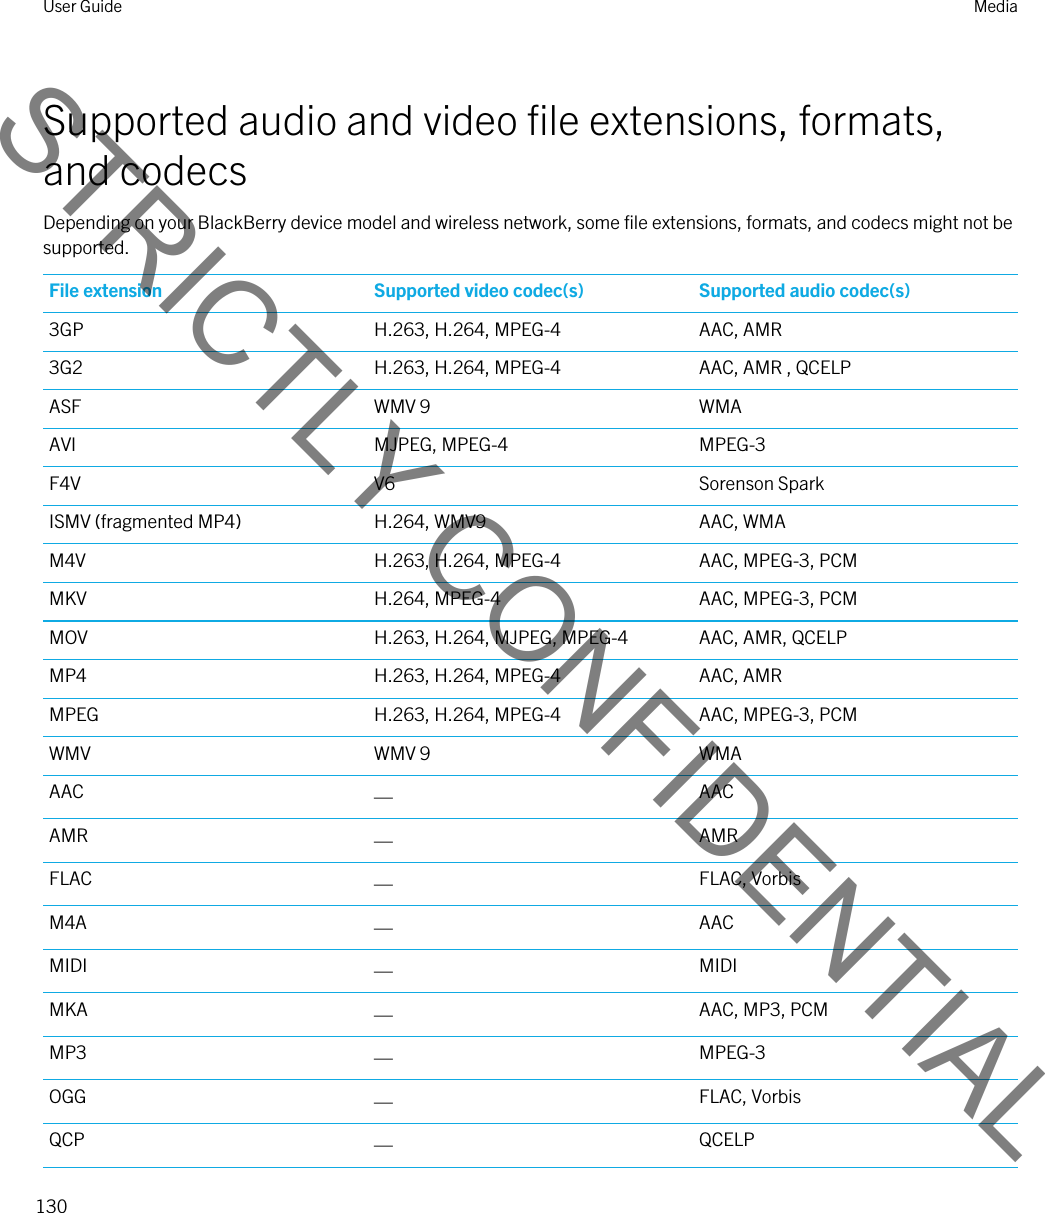 Supported audio and video file extensions, formats, and codecsDepending on your BlackBerry device model and wireless network, some file extensions, formats, and codecs might not be supported.File extension Supported video codec(s) Supported audio codec(s)3GP H.263, H.264, MPEG-4 AAC, AMR3G2 H.263, H.264, MPEG-4 AAC, AMR , QCELPASF WMV 9 WMAAVI MJPEG, MPEG-4 MPEG-3F4V V6 Sorenson SparkISMV (fragmented MP4) H.264, WMV9 AAC, WMAM4V H.263, H.264, MPEG-4 AAC, MPEG-3, PCMMKV H.264, MPEG-4 AAC, MPEG-3, PCMMOV H.263, H.264, MJPEG, MPEG-4 AAC, AMR, QCELPMP4 H.263, H.264, MPEG-4 AAC, AMRMPEG H.263, H.264, MPEG-4 AAC, MPEG-3, PCMWMV WMV 9 WMAAAC —AACAMR —AMRFLAC —FLAC, VorbisM4A —AACMIDI —MIDIMKA —AAC, MP3, PCMMP3 —MPEG-3OGG —FLAC, VorbisQCP —QCELPUser Guide Media130STRICTLY CONFIDENTIAL